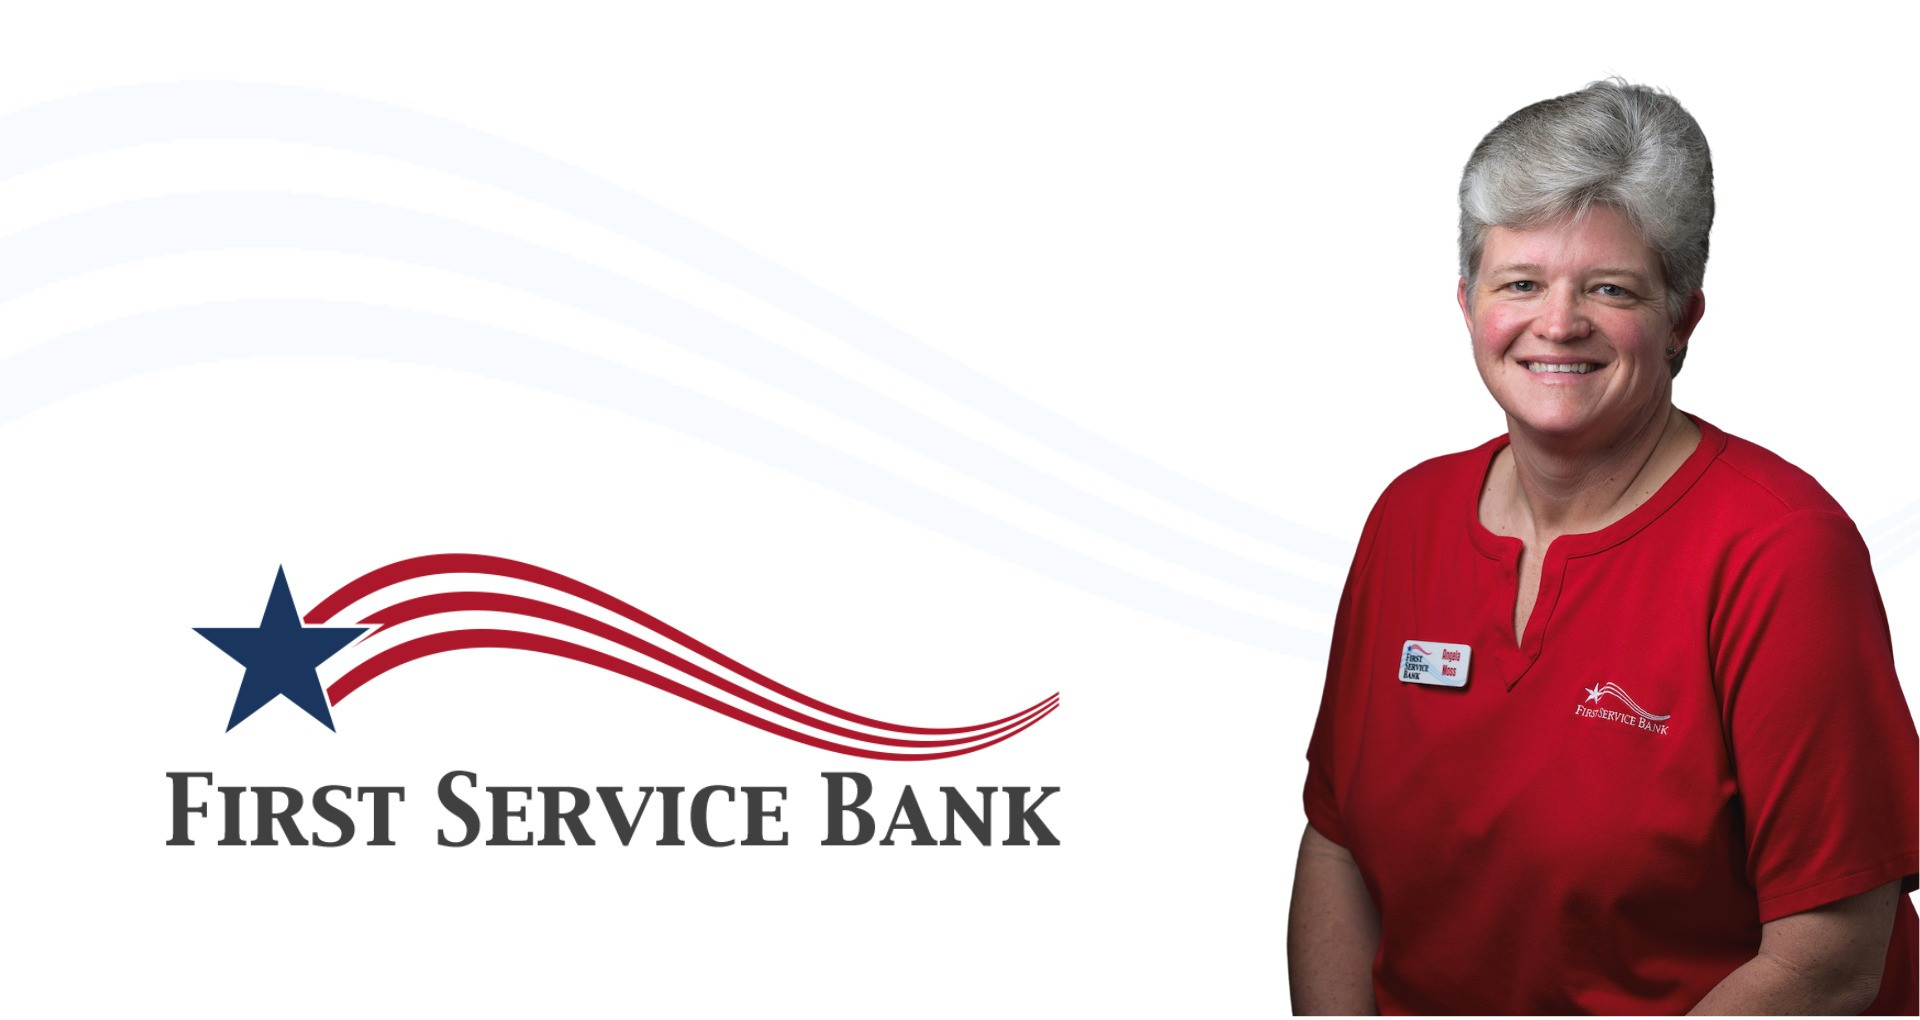 First Service Bank Welcomes Angela Moss as Executive Assistant to the Chief Operating Officer